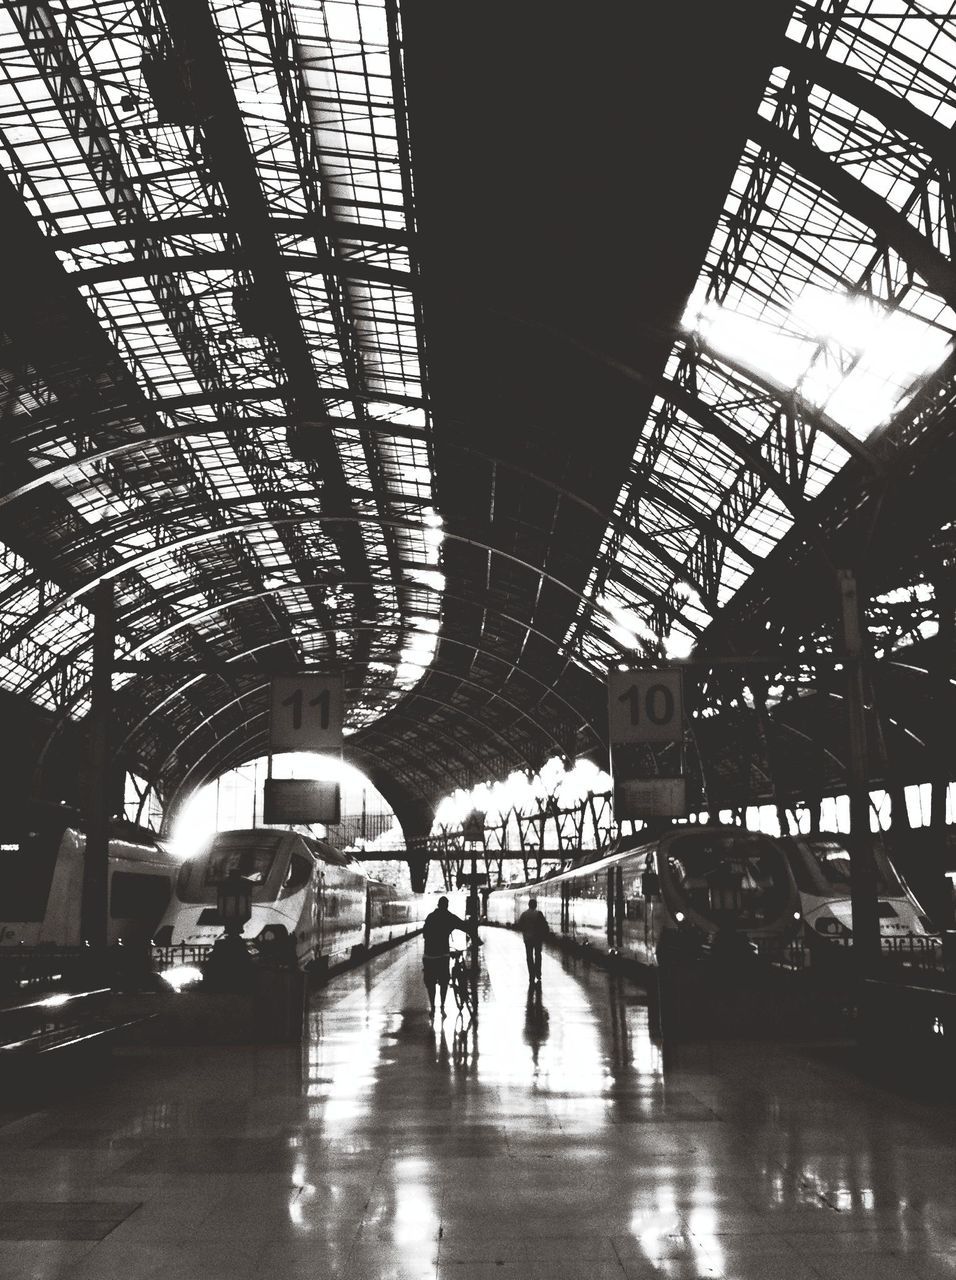 indoors, built structure, architecture, ceiling, men, reflection, lifestyles, person, walking, transportation, illuminated, incidental people, leisure activity, medium group of people, railroad station, city life, large group of people, full length, connection